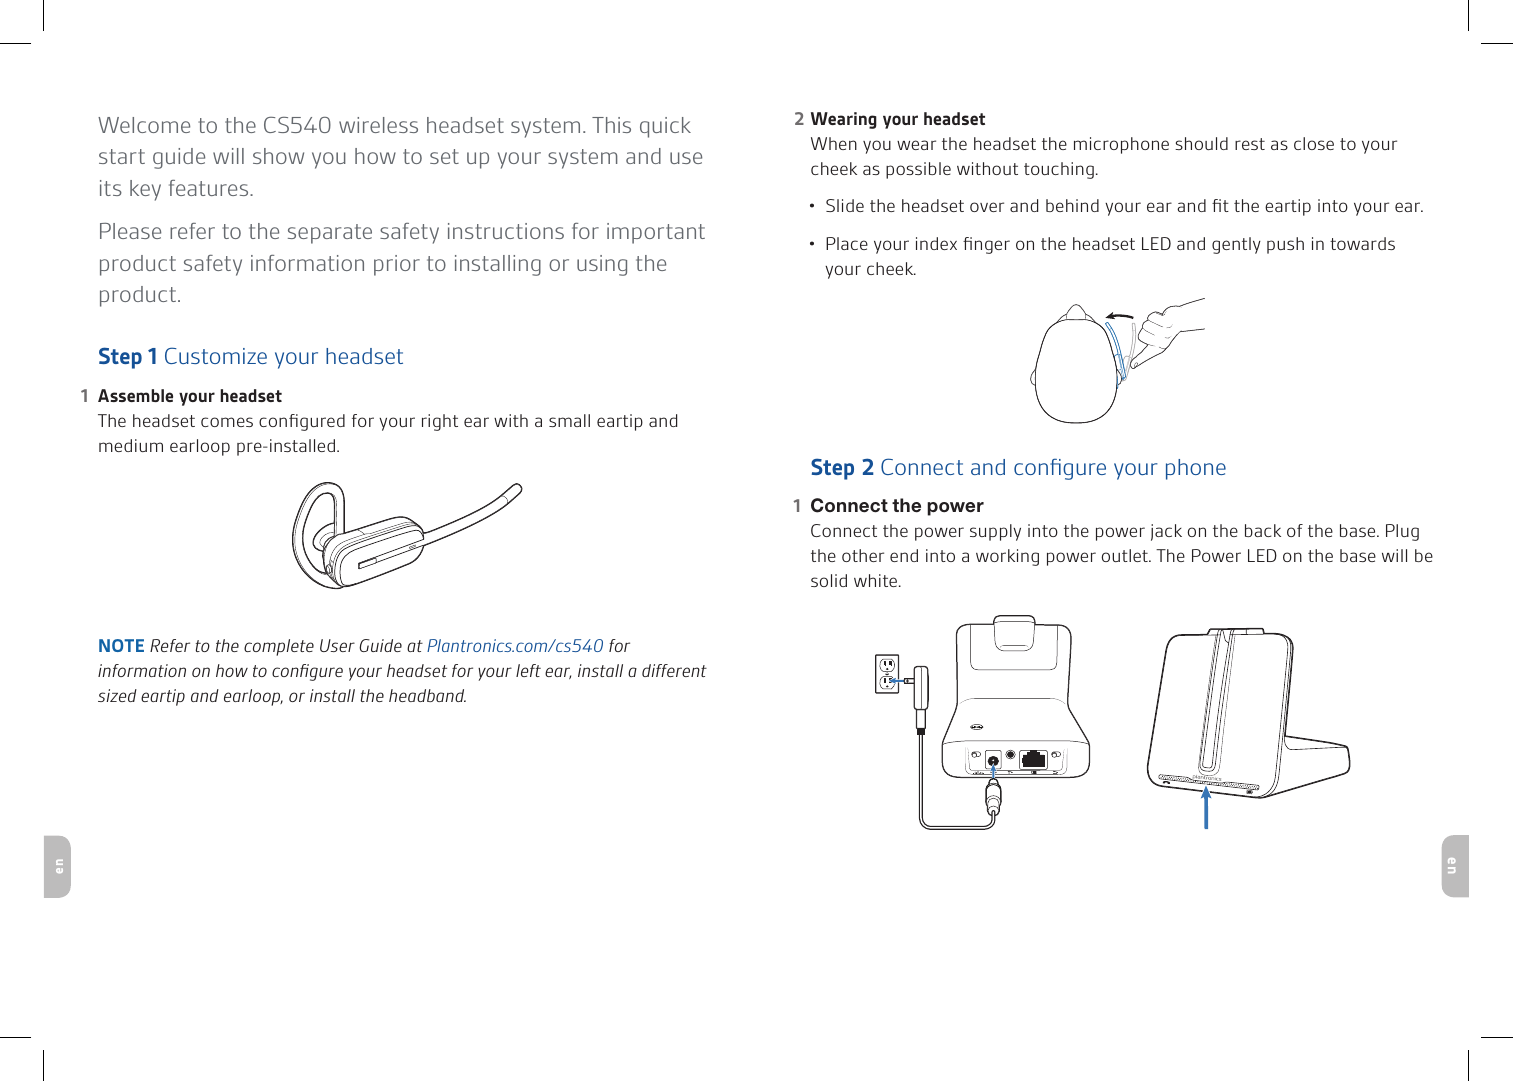 enenWelcome to the CS540 wireless headset system. This quick start guide will show you how to set up your system and use its key features. Please refer to the separate safety instructions for important product safety information prior to installing or using the product.Step 1 Customize your headsetAssemble your headset1 The headset comes conﬁgured for your right ear with a small eartip and medium earloop pre-installed. NOTE Refer to the complete User Guide at Plantronics.com/cs540 for information on how to conﬁgure your headset for your left ear, install a different sized eartip and earloop, or install the headband. Wearing your headset2 When you wear the headset the microphone should rest as close to your cheek as possible without touching.Slide the headset over and behind your ear and ﬁt the eartip into your ear.•Place your index ﬁnger on the headset LED and gently push in towards •your cheek. Step 2 Connect and conﬁgure your phoneConnect the power1   Connect the power supply into the power jack on the back of the base. Plug the other end into a working power outlet. The Power LED on the base will be solid white. Base overviewHeadset overview